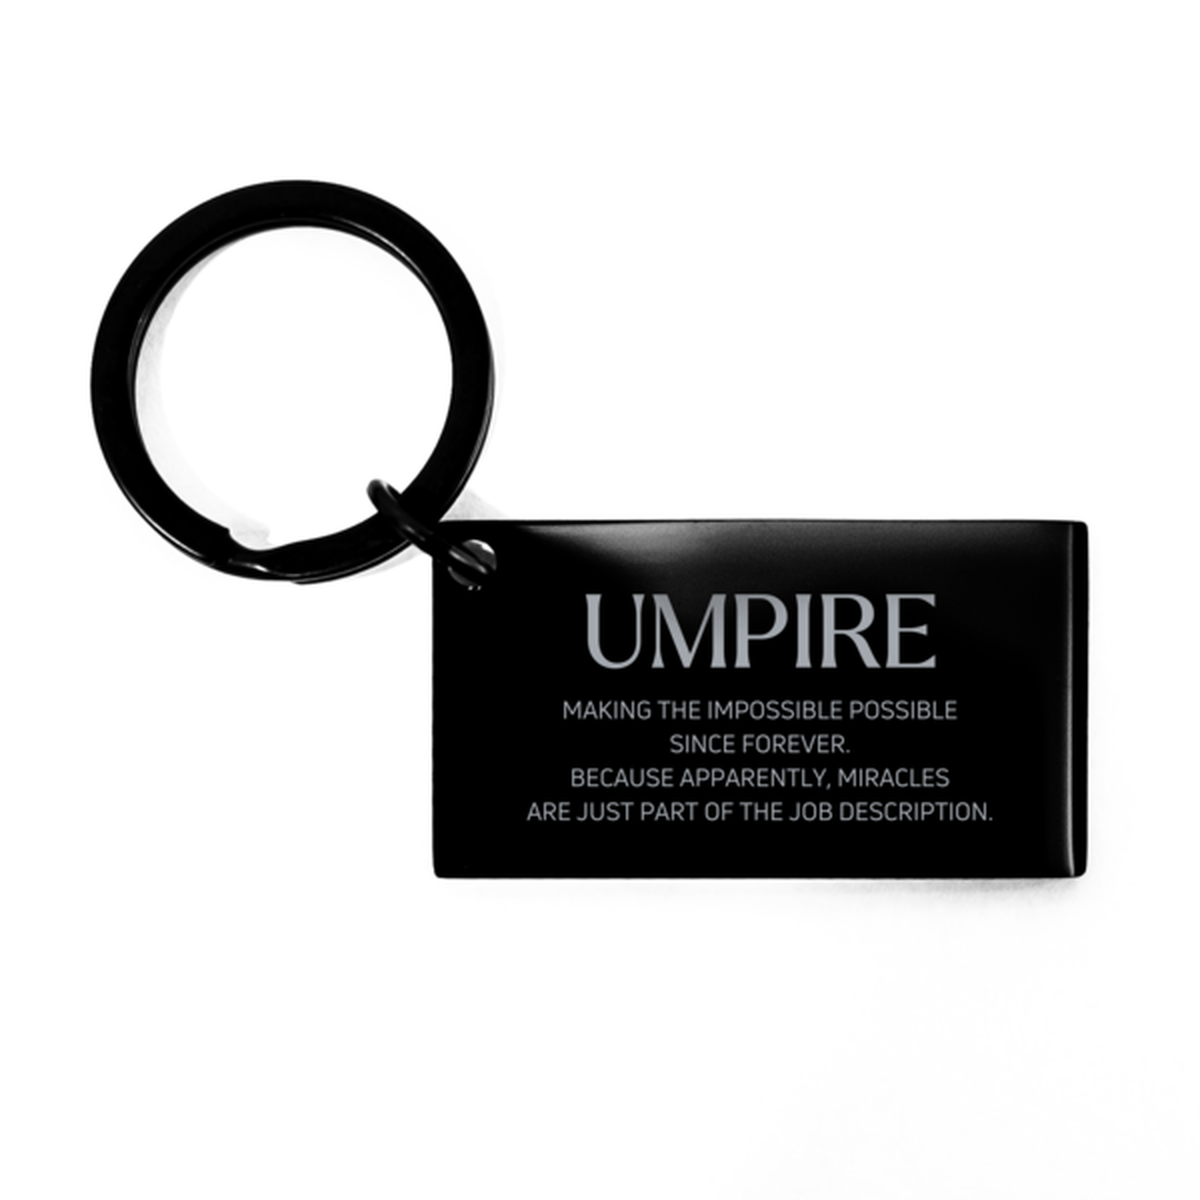 Funny Umpire Gifts, Miracles are just part of the job description, Inspirational Birthday Keychain For Umpire, Men, Women, Coworkers, Friends, Boss